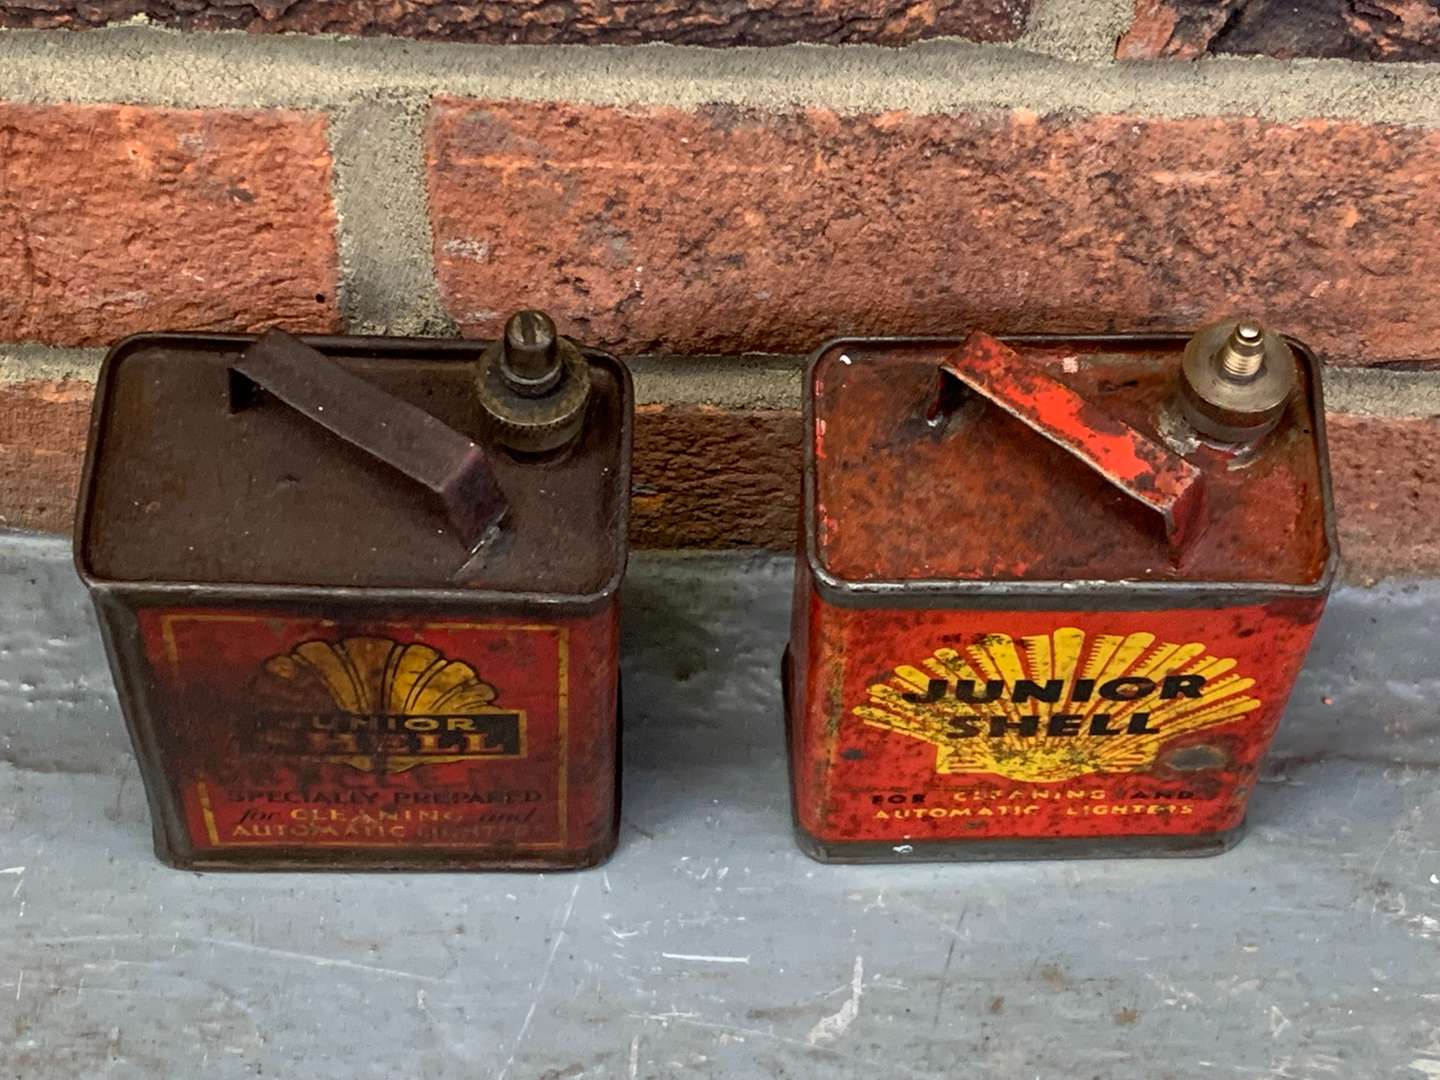 <p>Two Early Junior Shell Oil Cans</p>